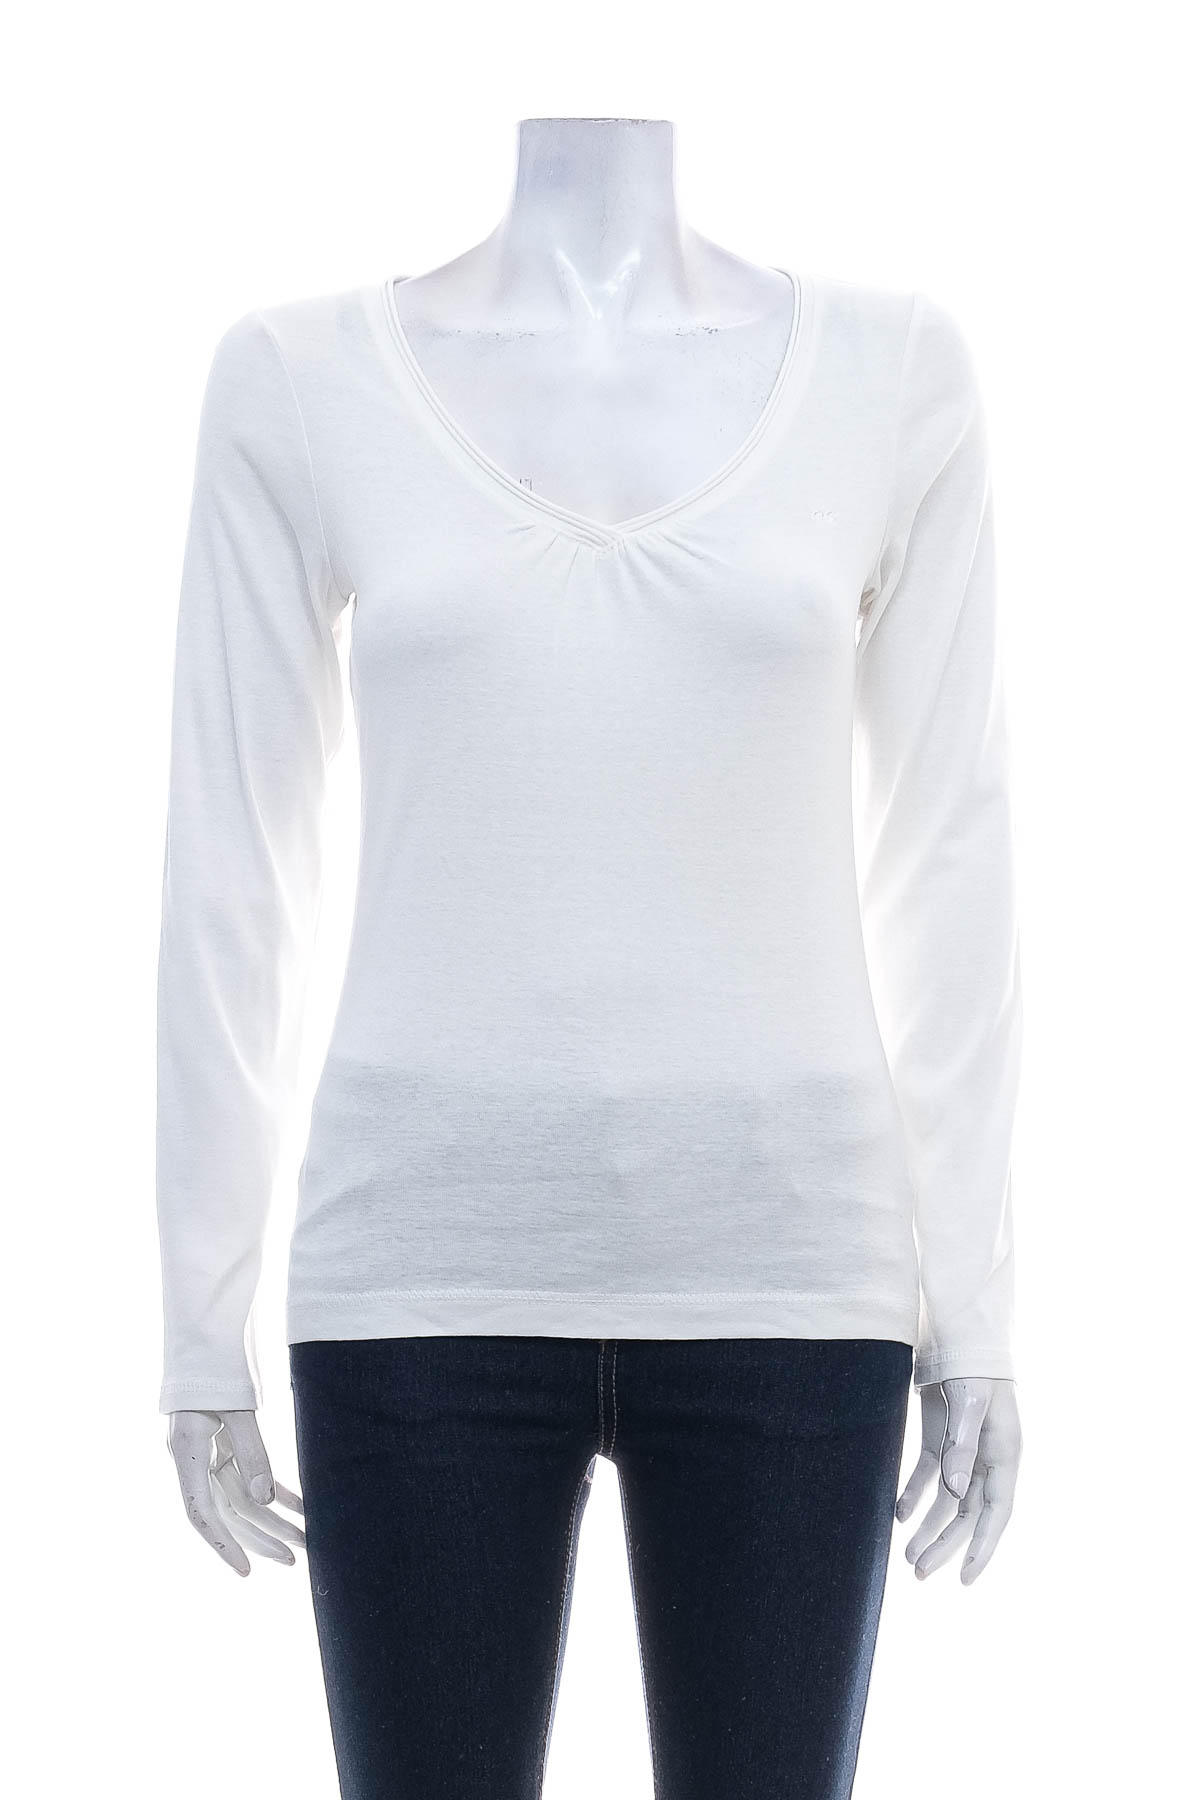 Women's blouse - QS by S.Oliver - 0